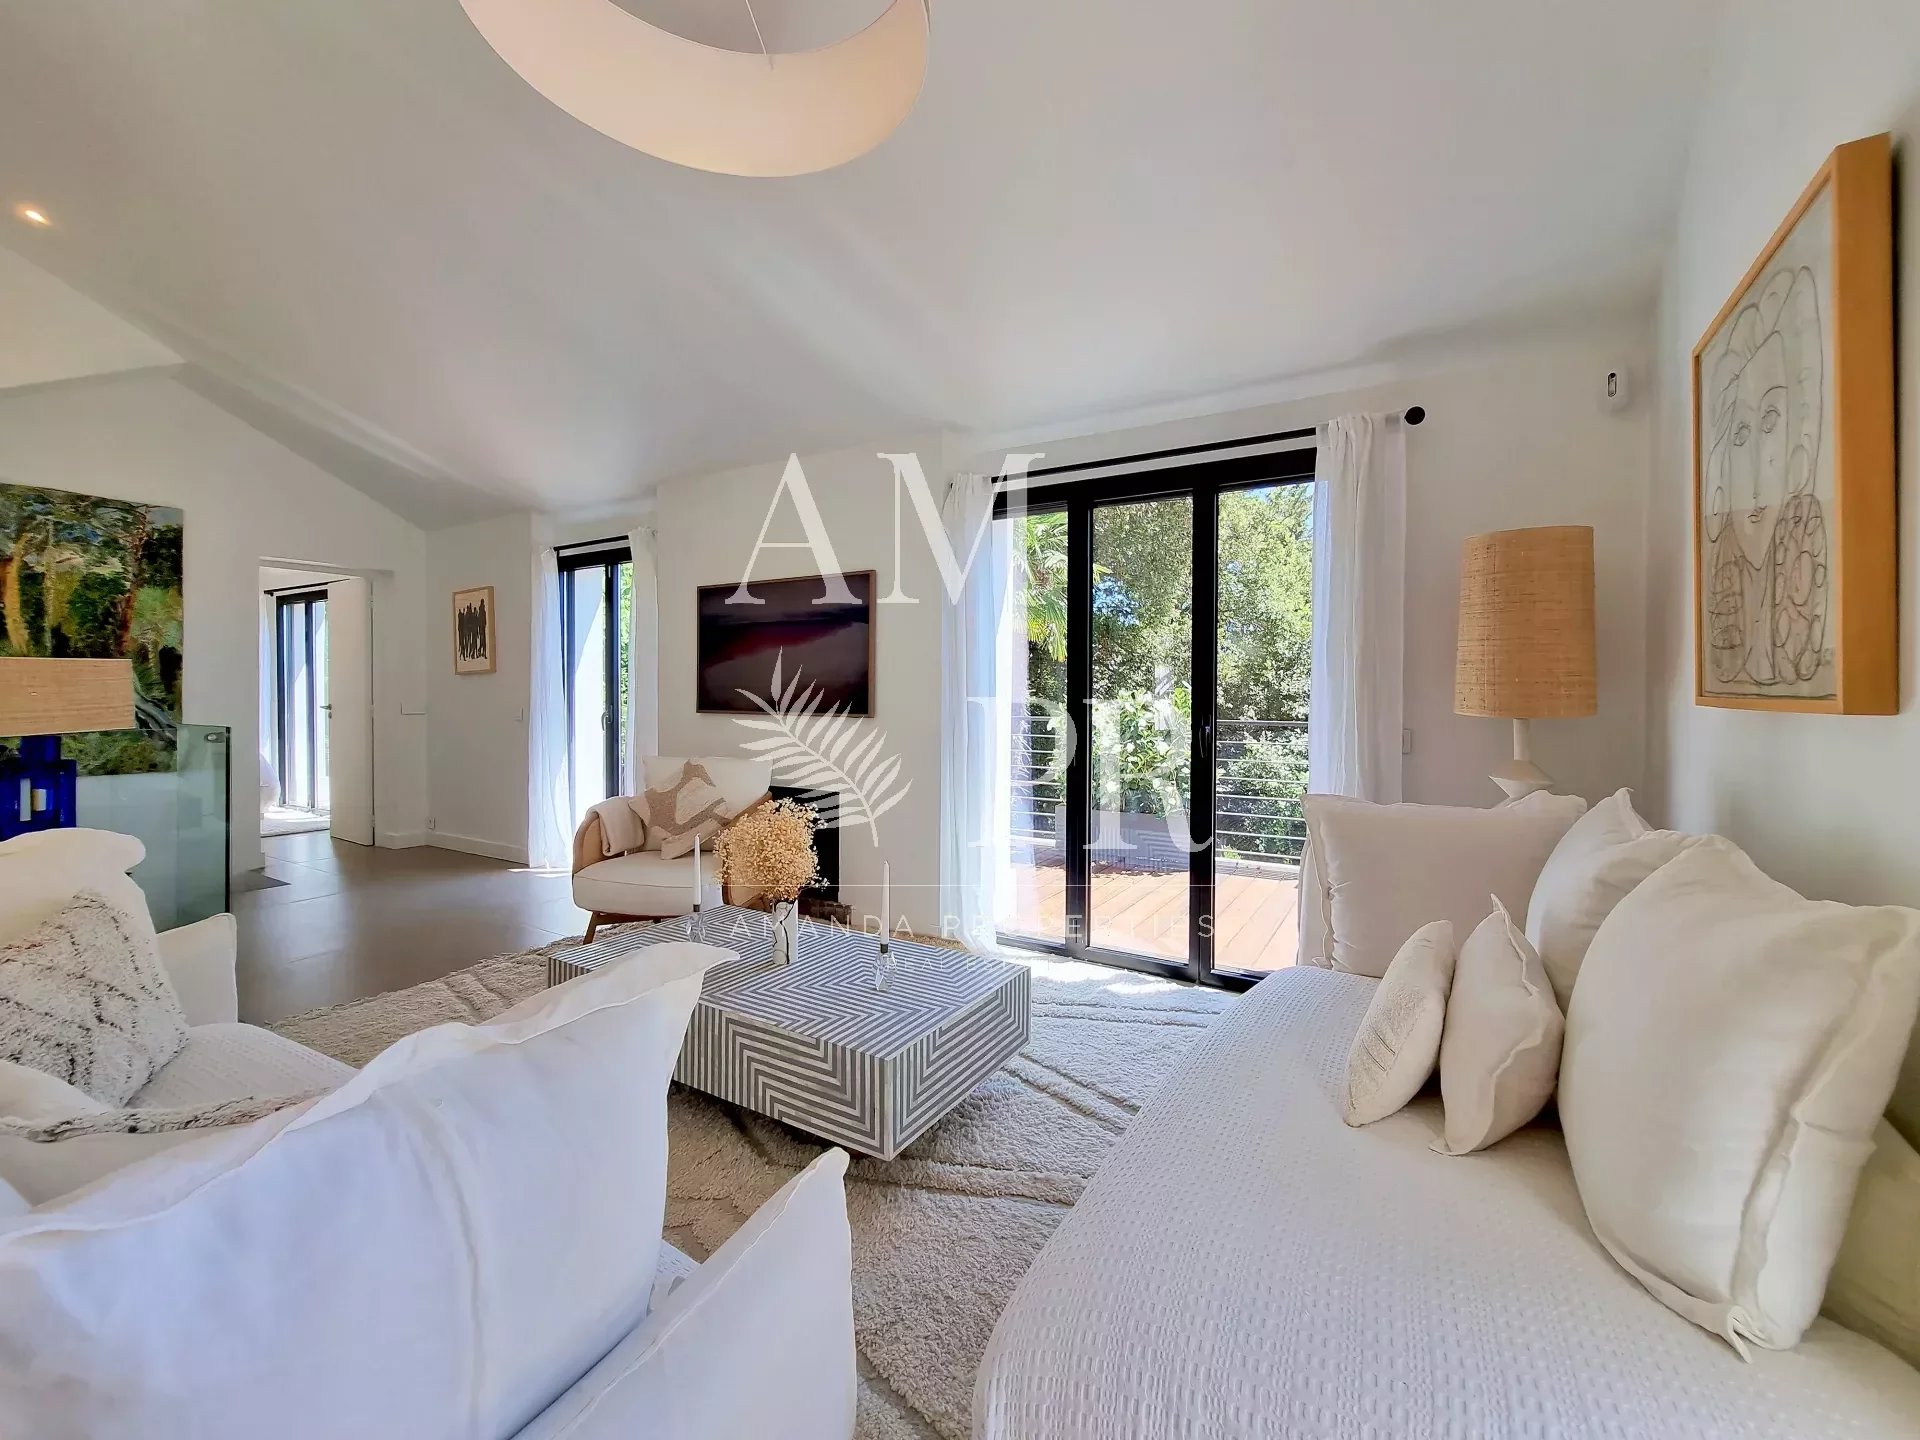 Cannes Centre - Charming villa of 170sqm in the city centre - sleeps 9